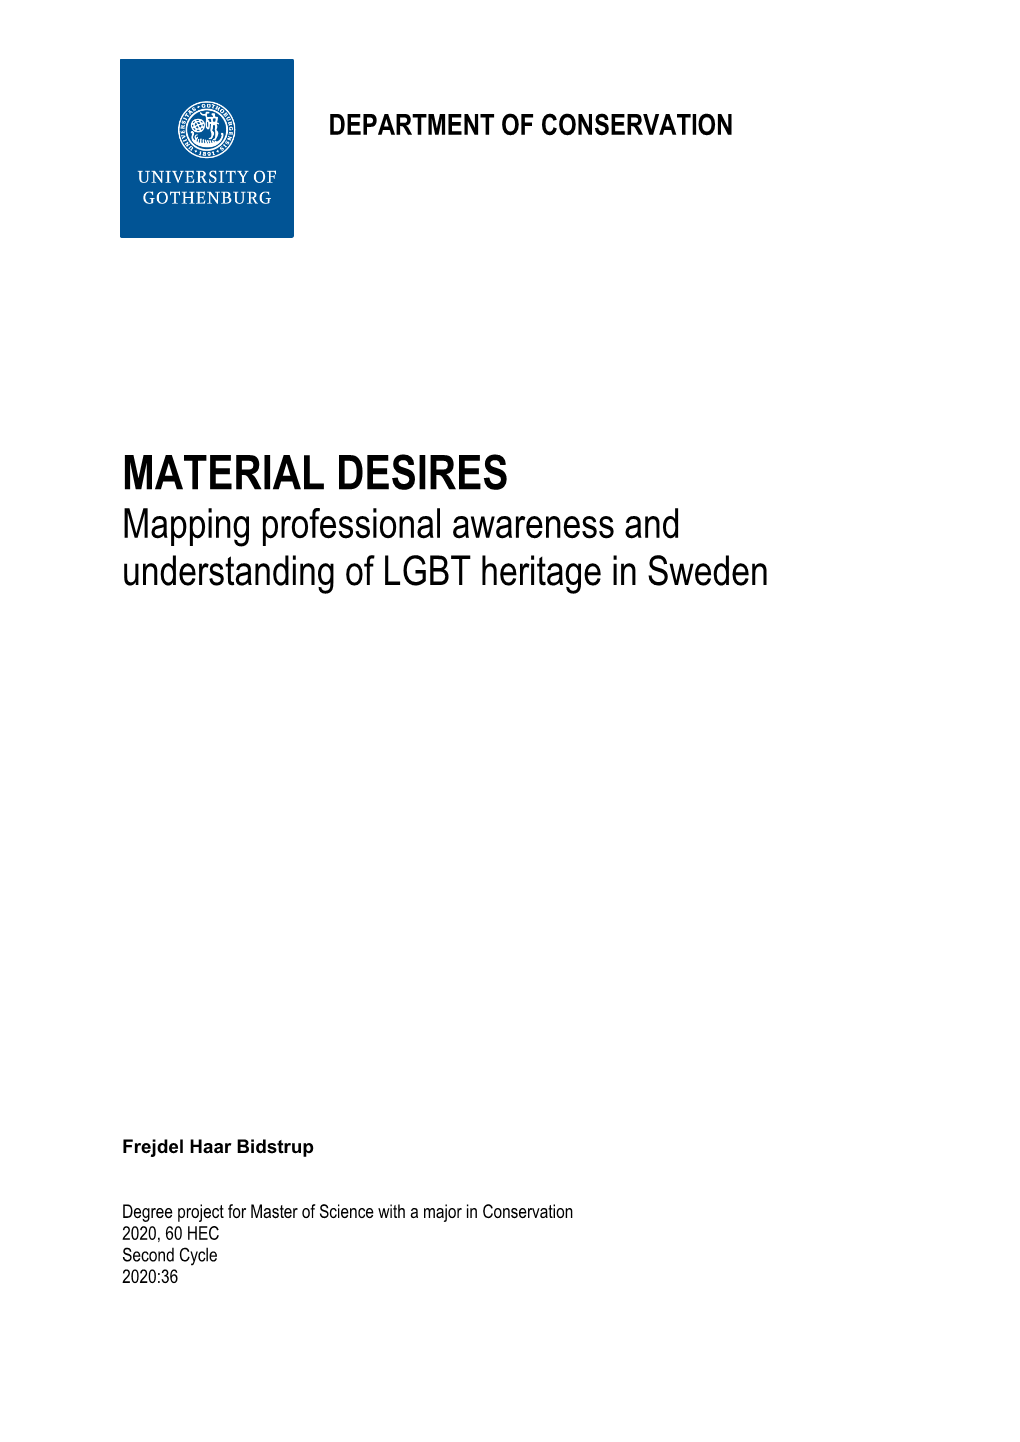 MATERIAL DESIRES Mapping Professional Awareness and Understanding of LGBT Heritage in Sweden